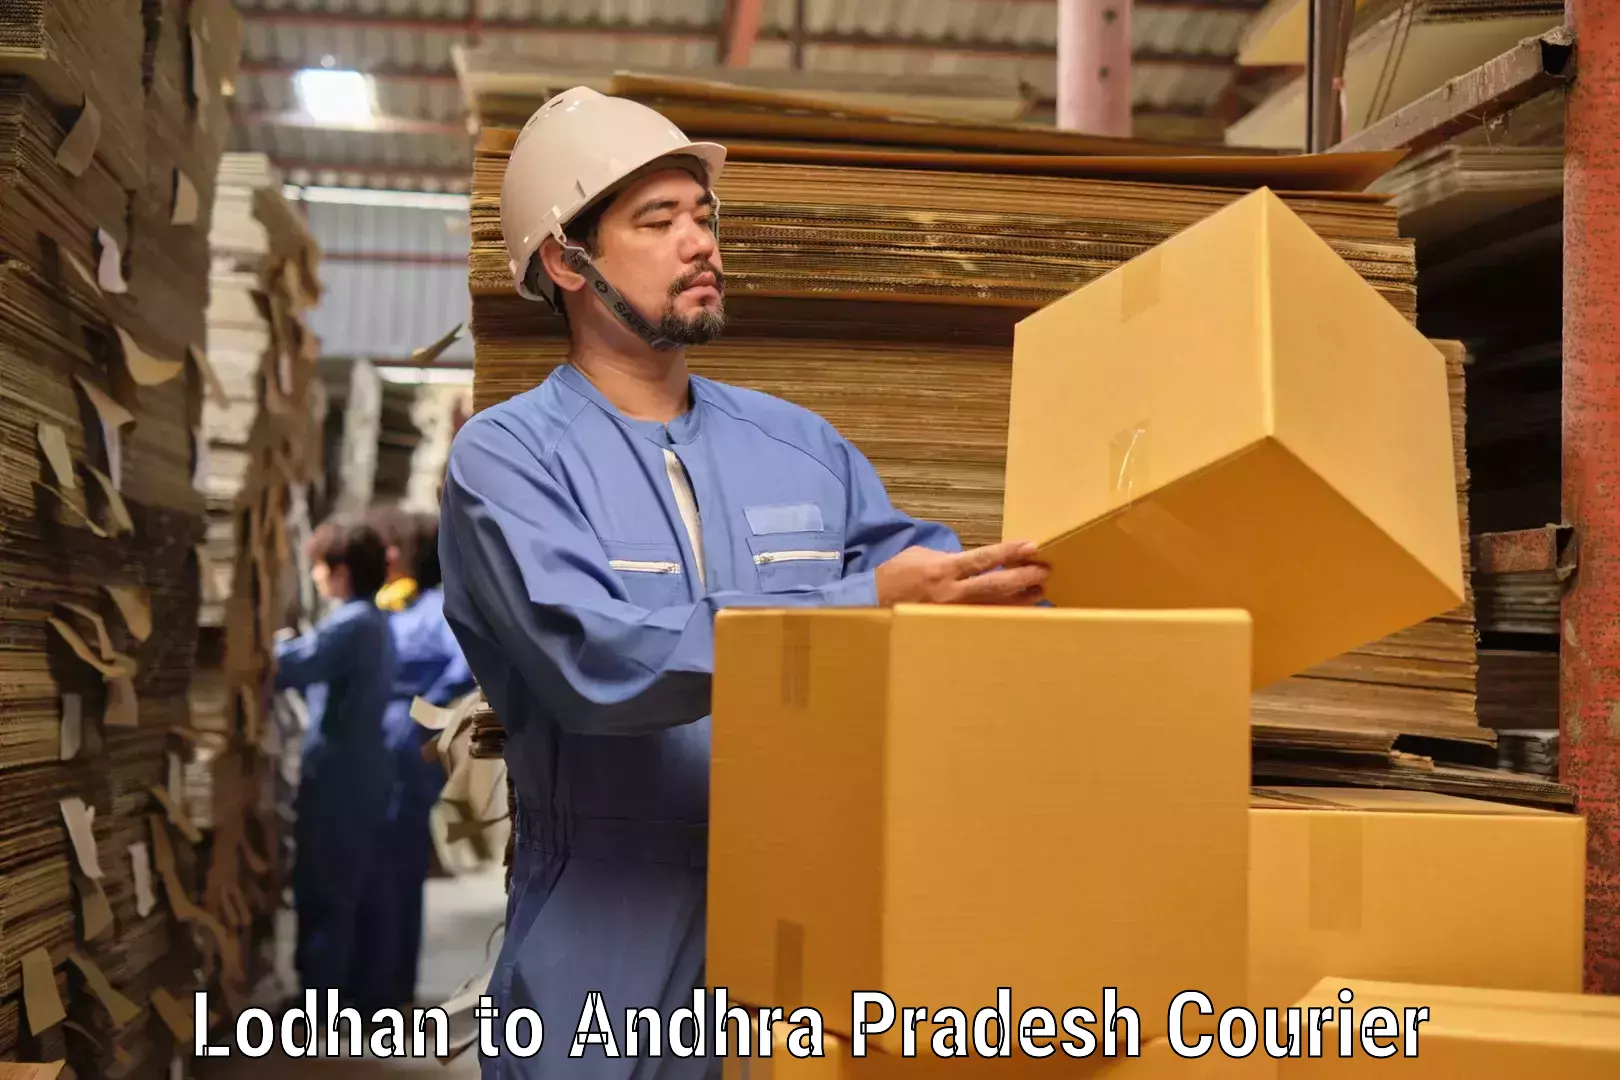 Reliable courier service Lodhan to Andhra Pradesh